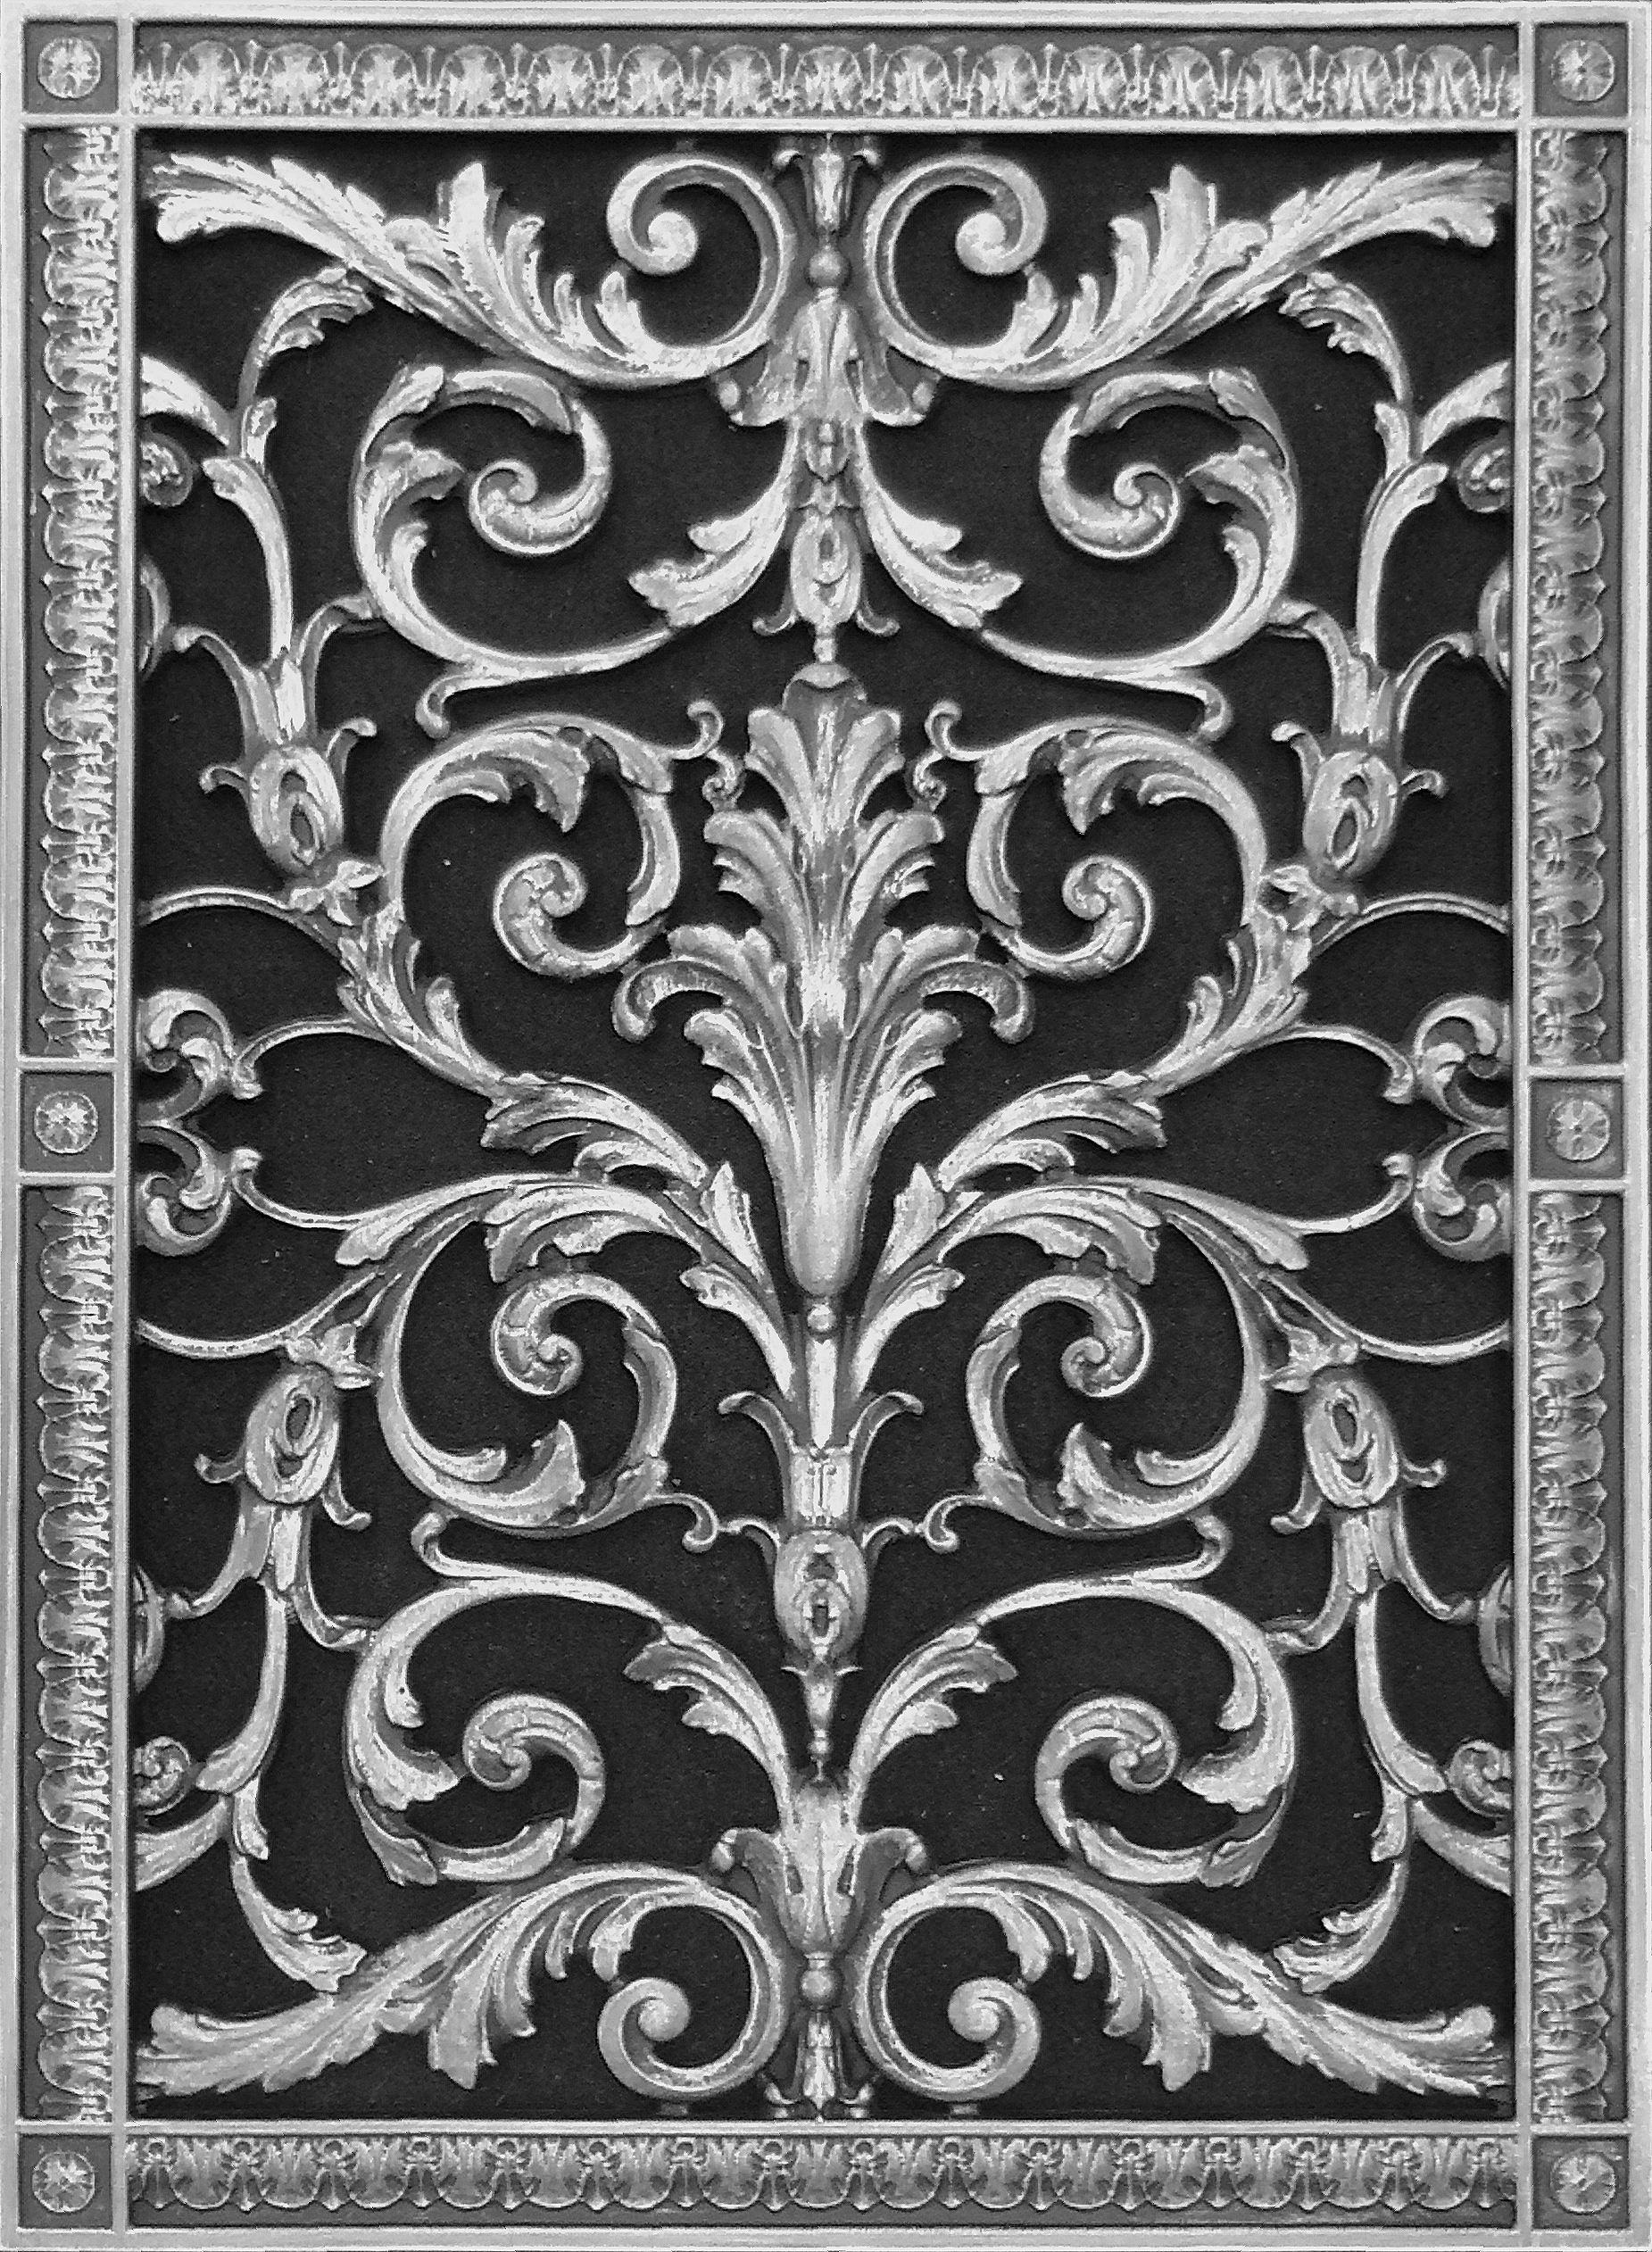 Decorative vent cover 20x14 in Louis XIV style in Pewter finish